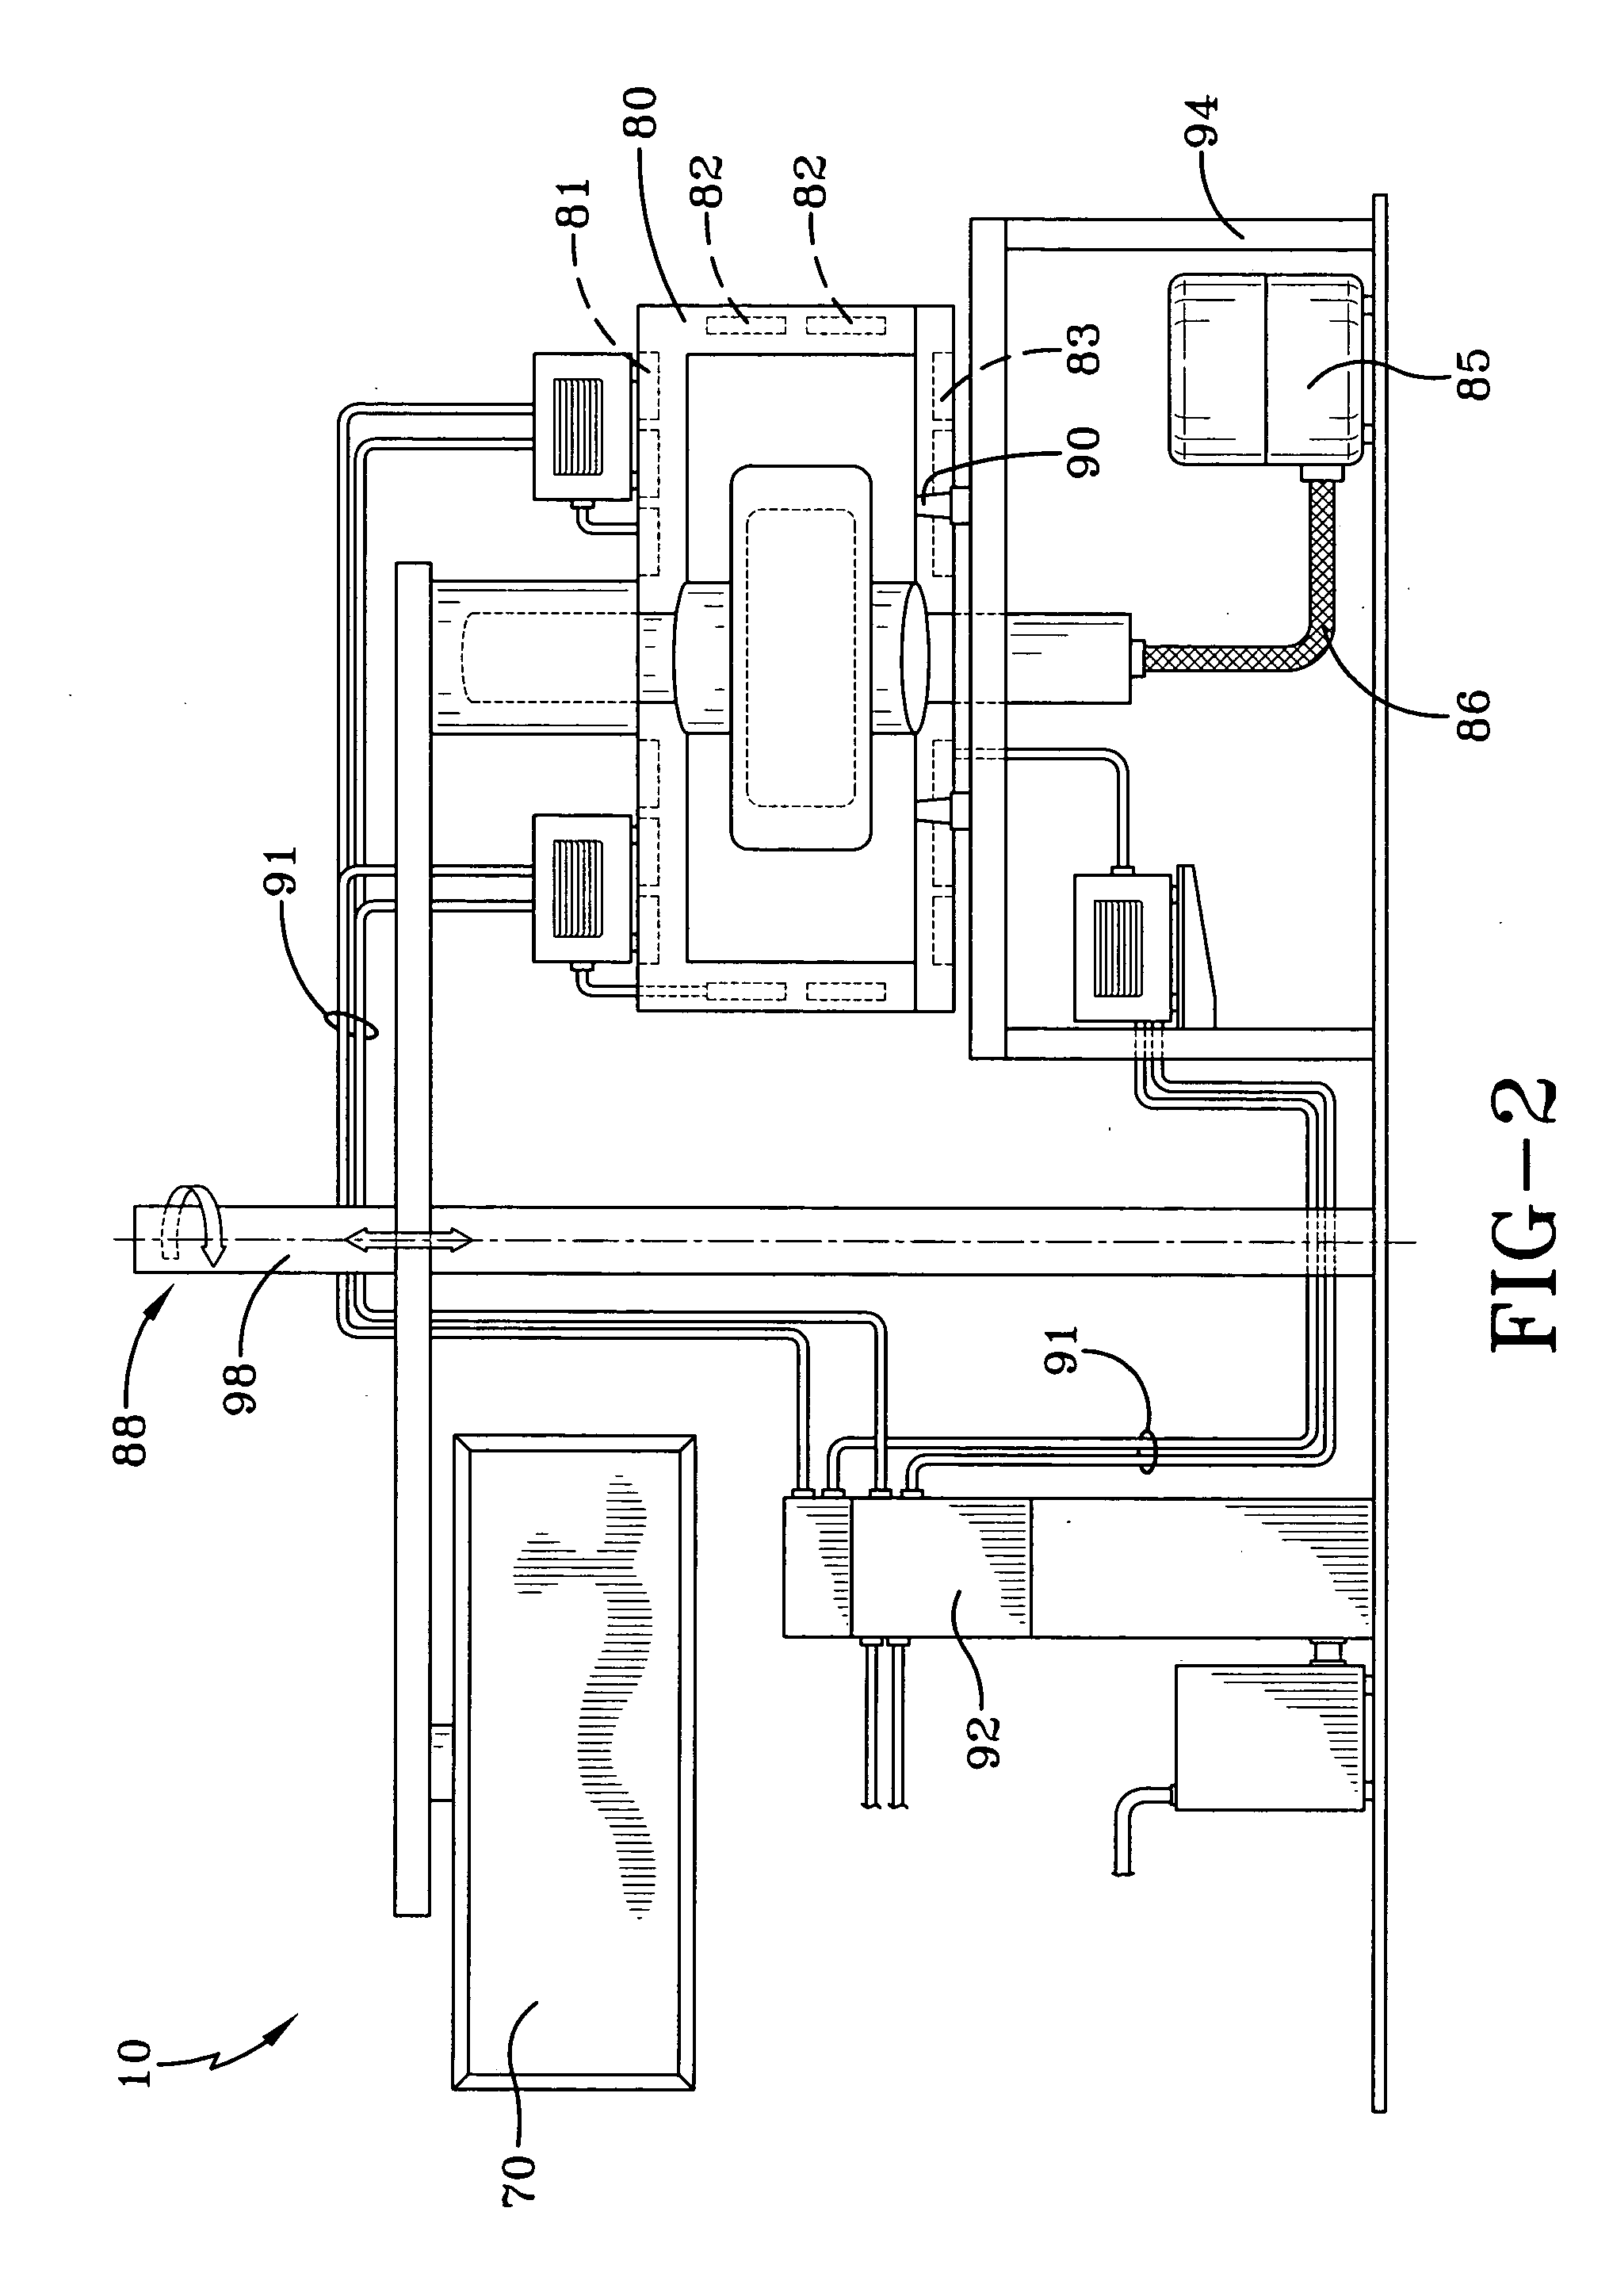 Single station tire curing method and apparatus